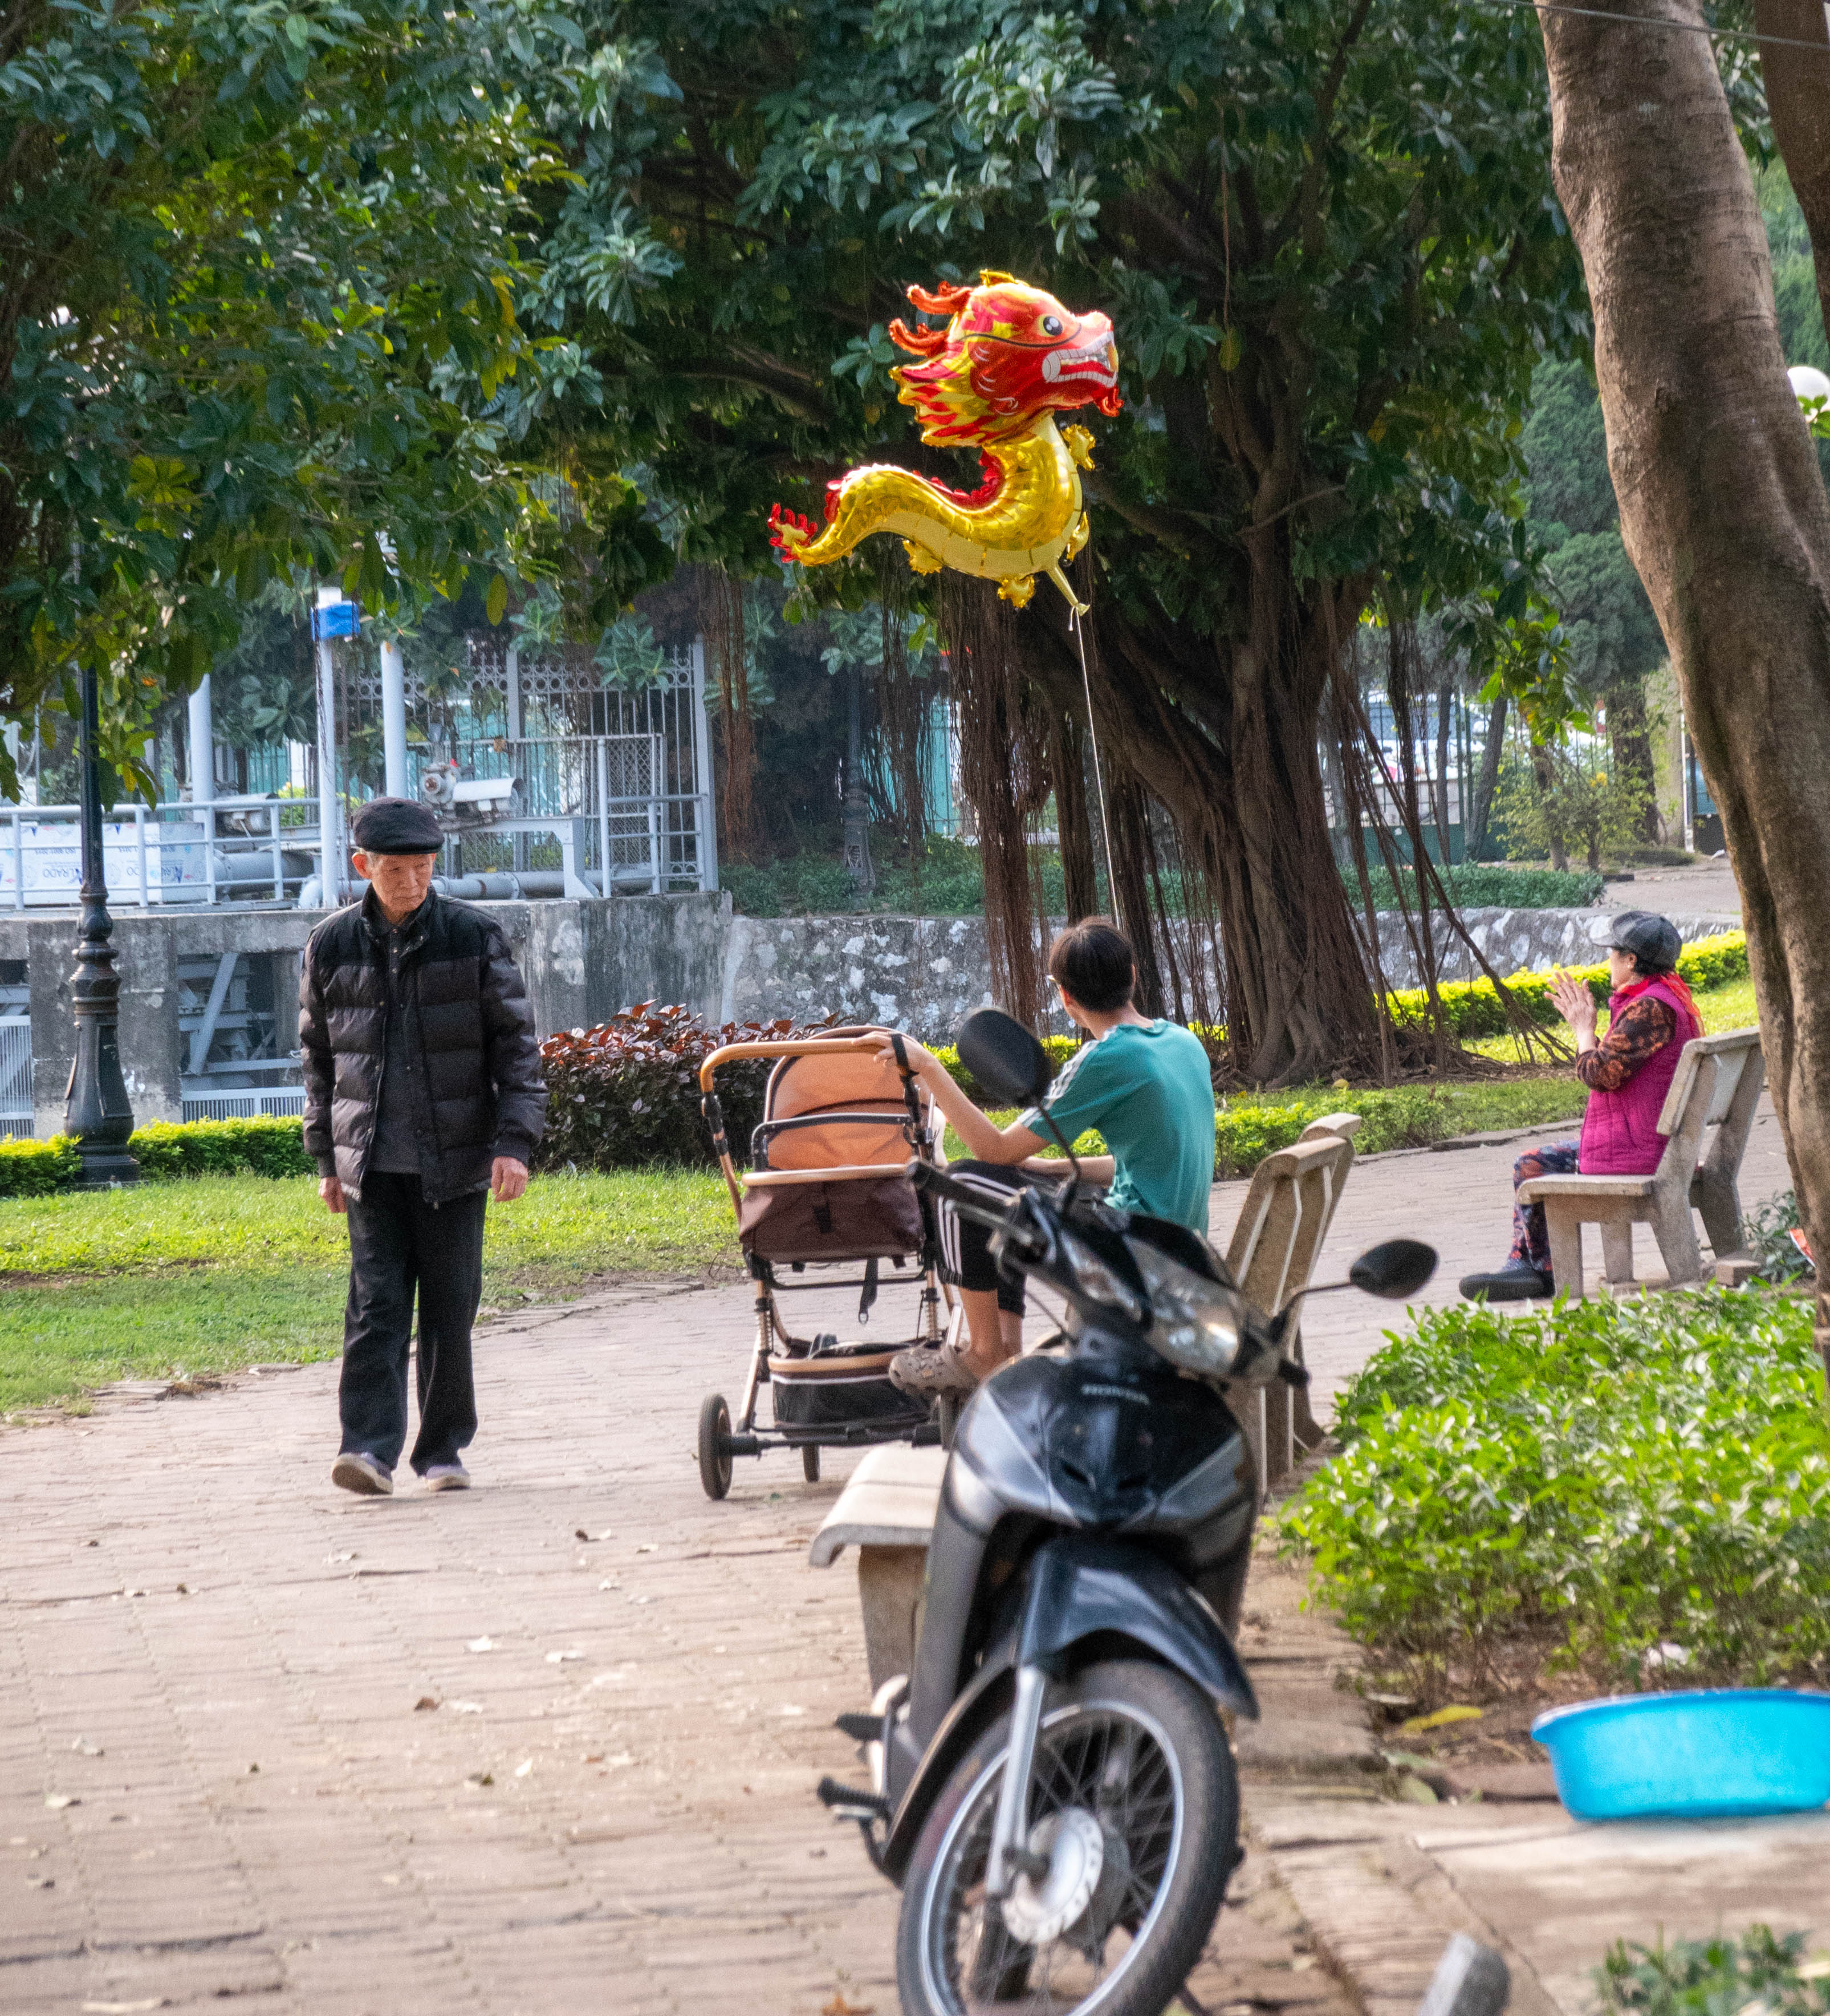 Picture of elderly man (on left) left walking by a man sitting on a bench with his feet propped up on a baby carrigage holding a mylar helium filled dragon who is looking at an elderly lady sitting on a bench on the right of picture